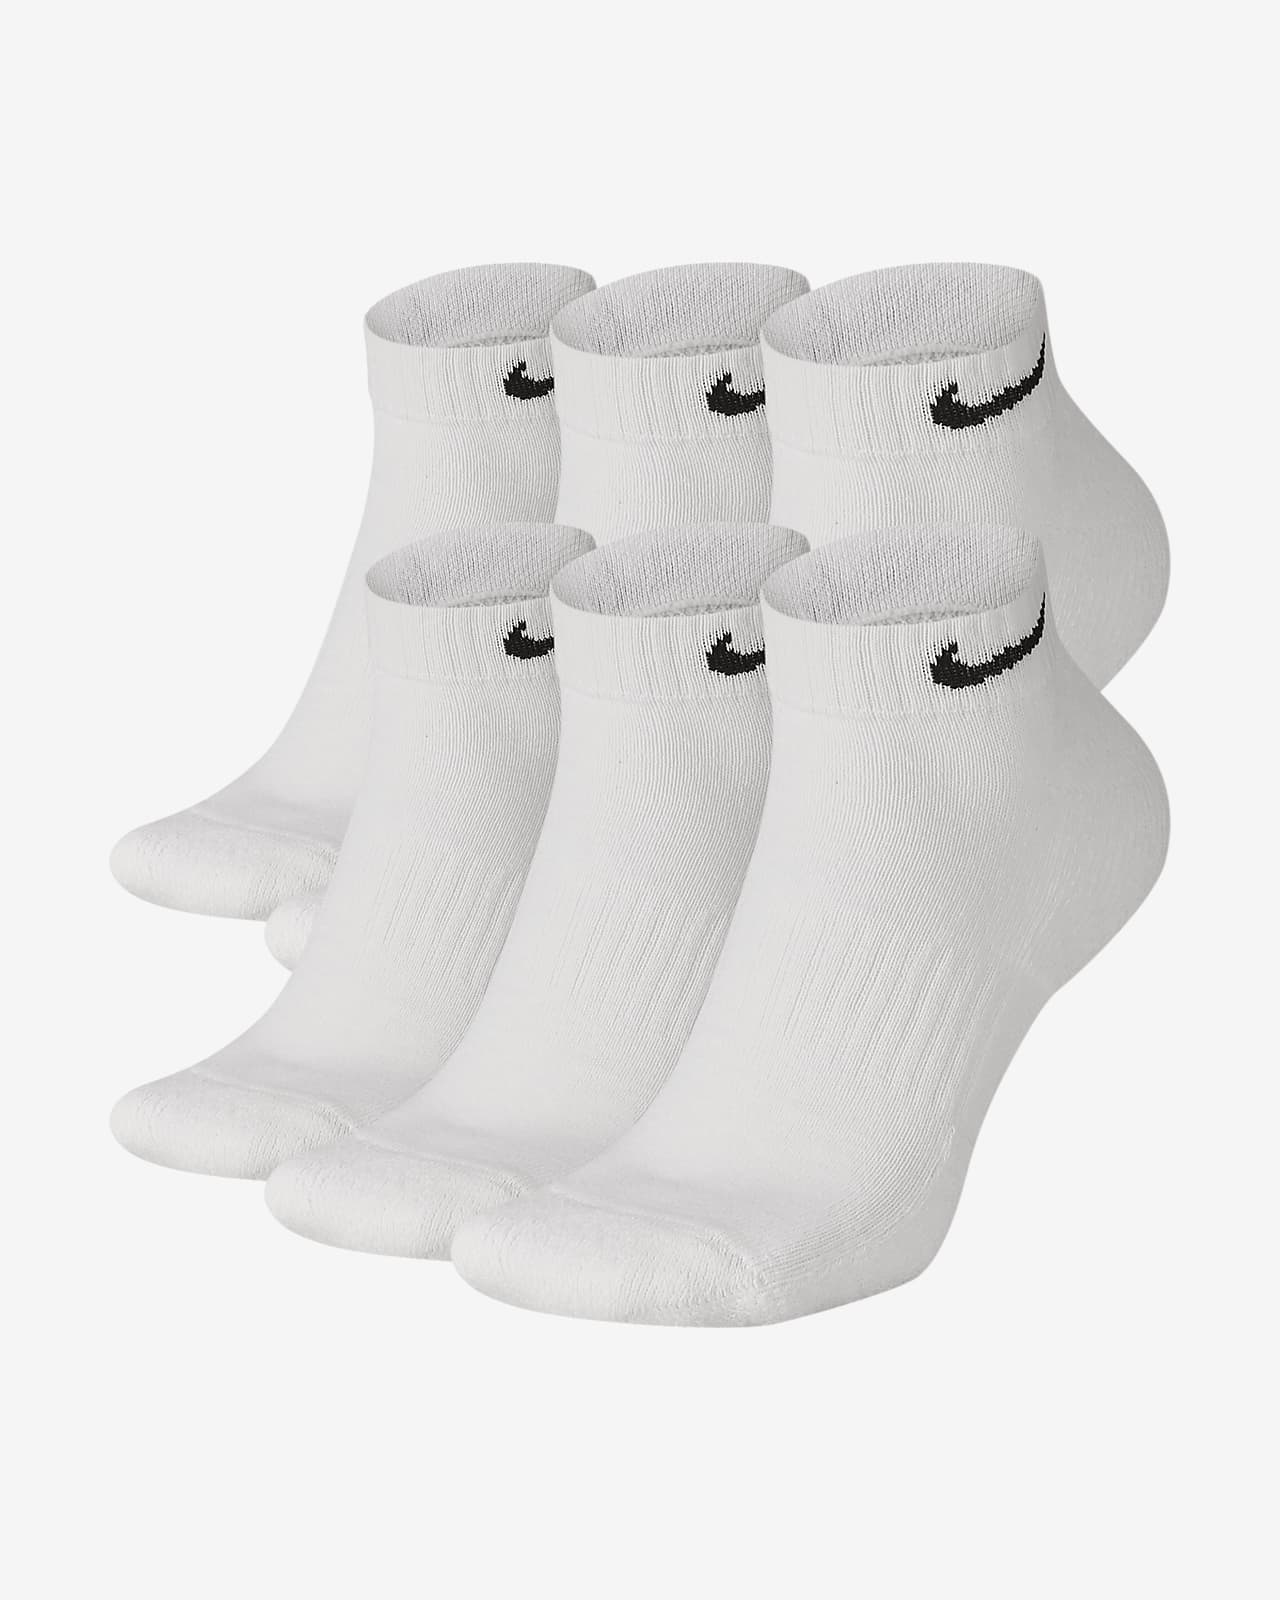 Calcetines Nike invisbles 3 pares Mujer - Esports Parra